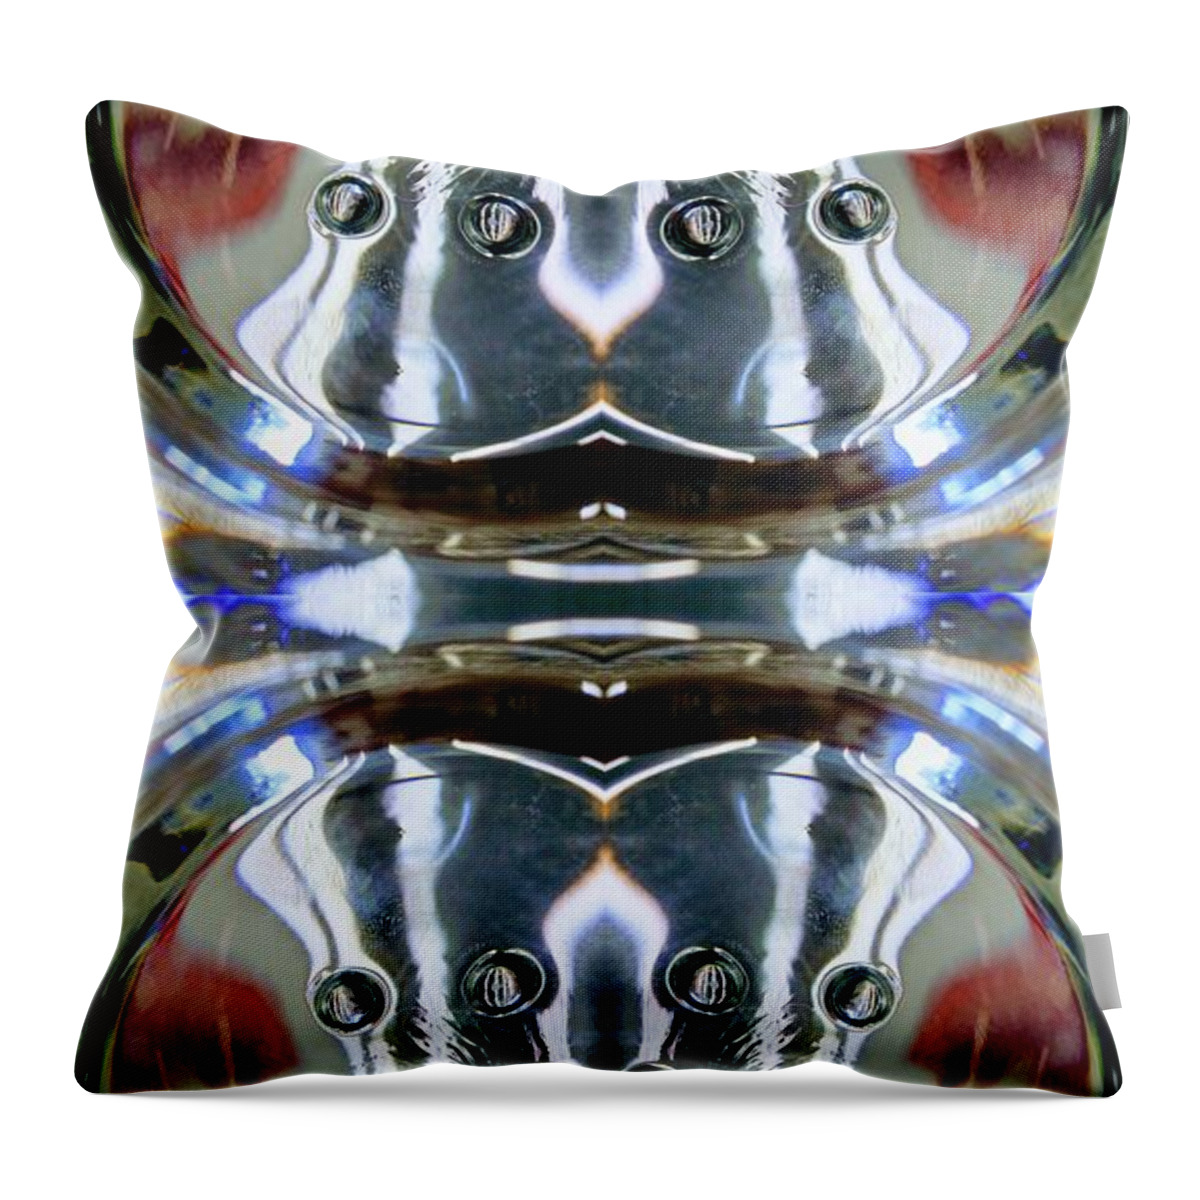  Throw Pillow featuring the digital art Patch Graphic #43 by Scott S Baker